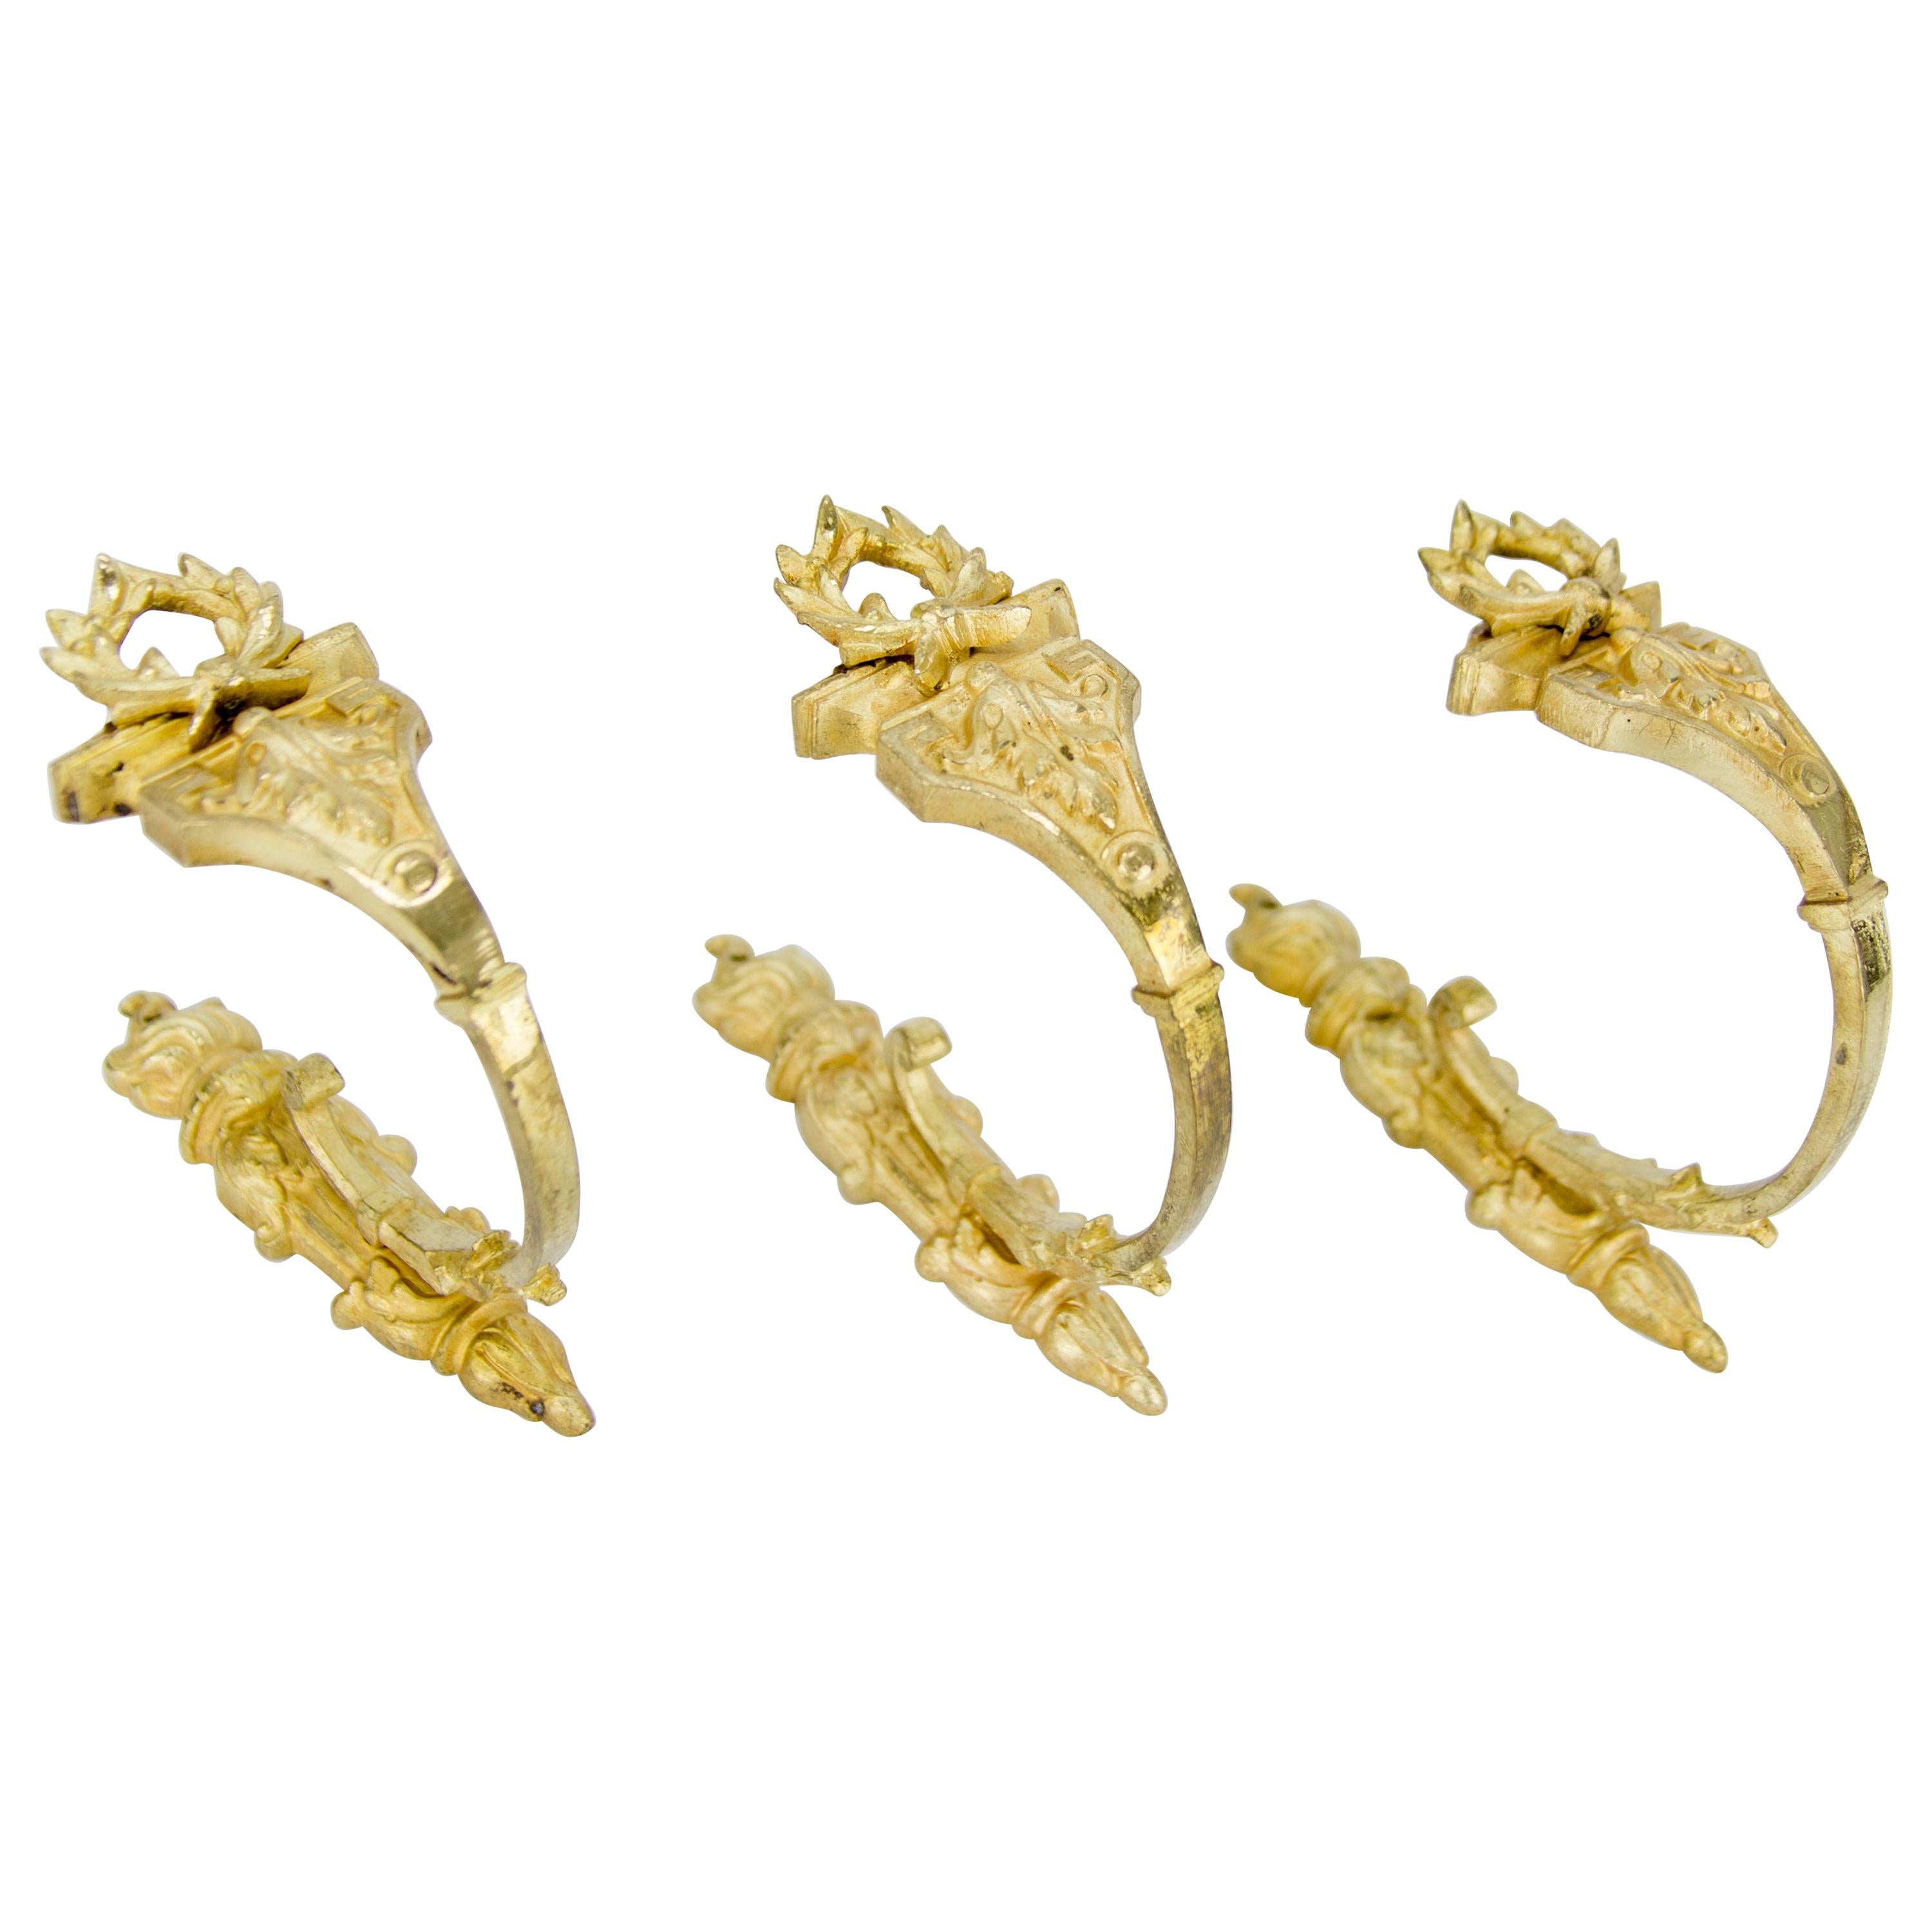 French Gilt Bronze Curtain Tiebacks or Curtain Holders Signed A.D., Set of 3 For Sale